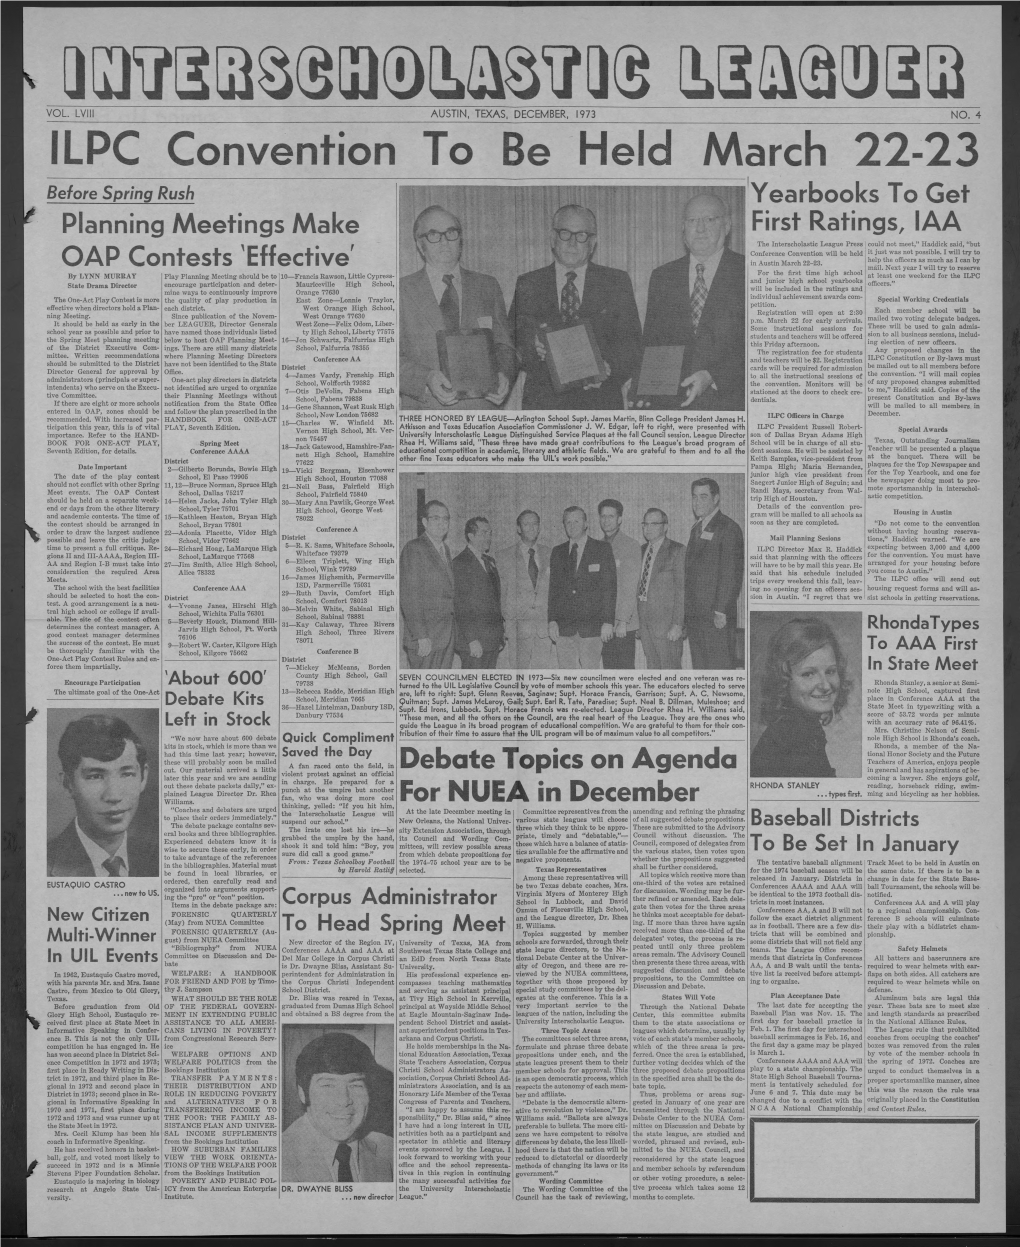 ILPC Convention to Be Held March 22-23